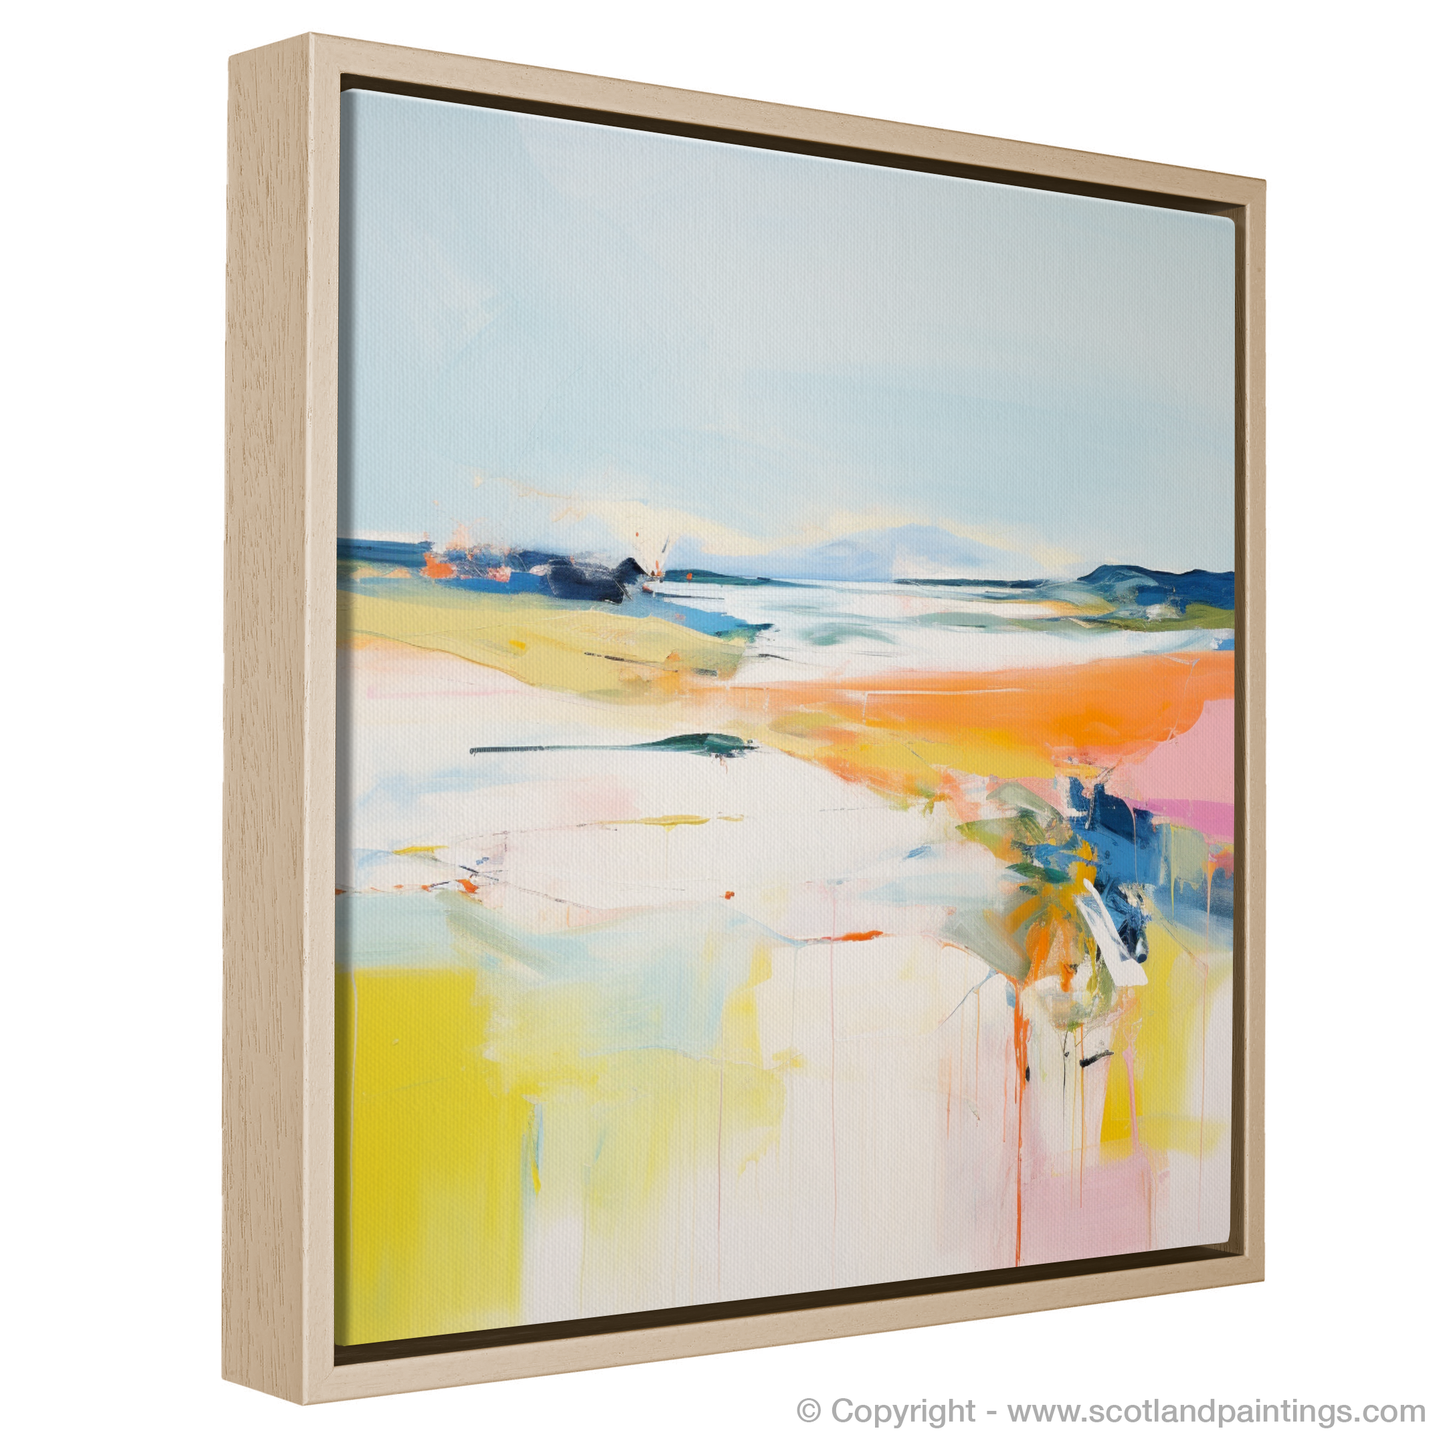 Painting and Art Print of Isle of Tiree, Inner Hebrides in summer entitled "Summer Abstraction: Isle of Tiree".